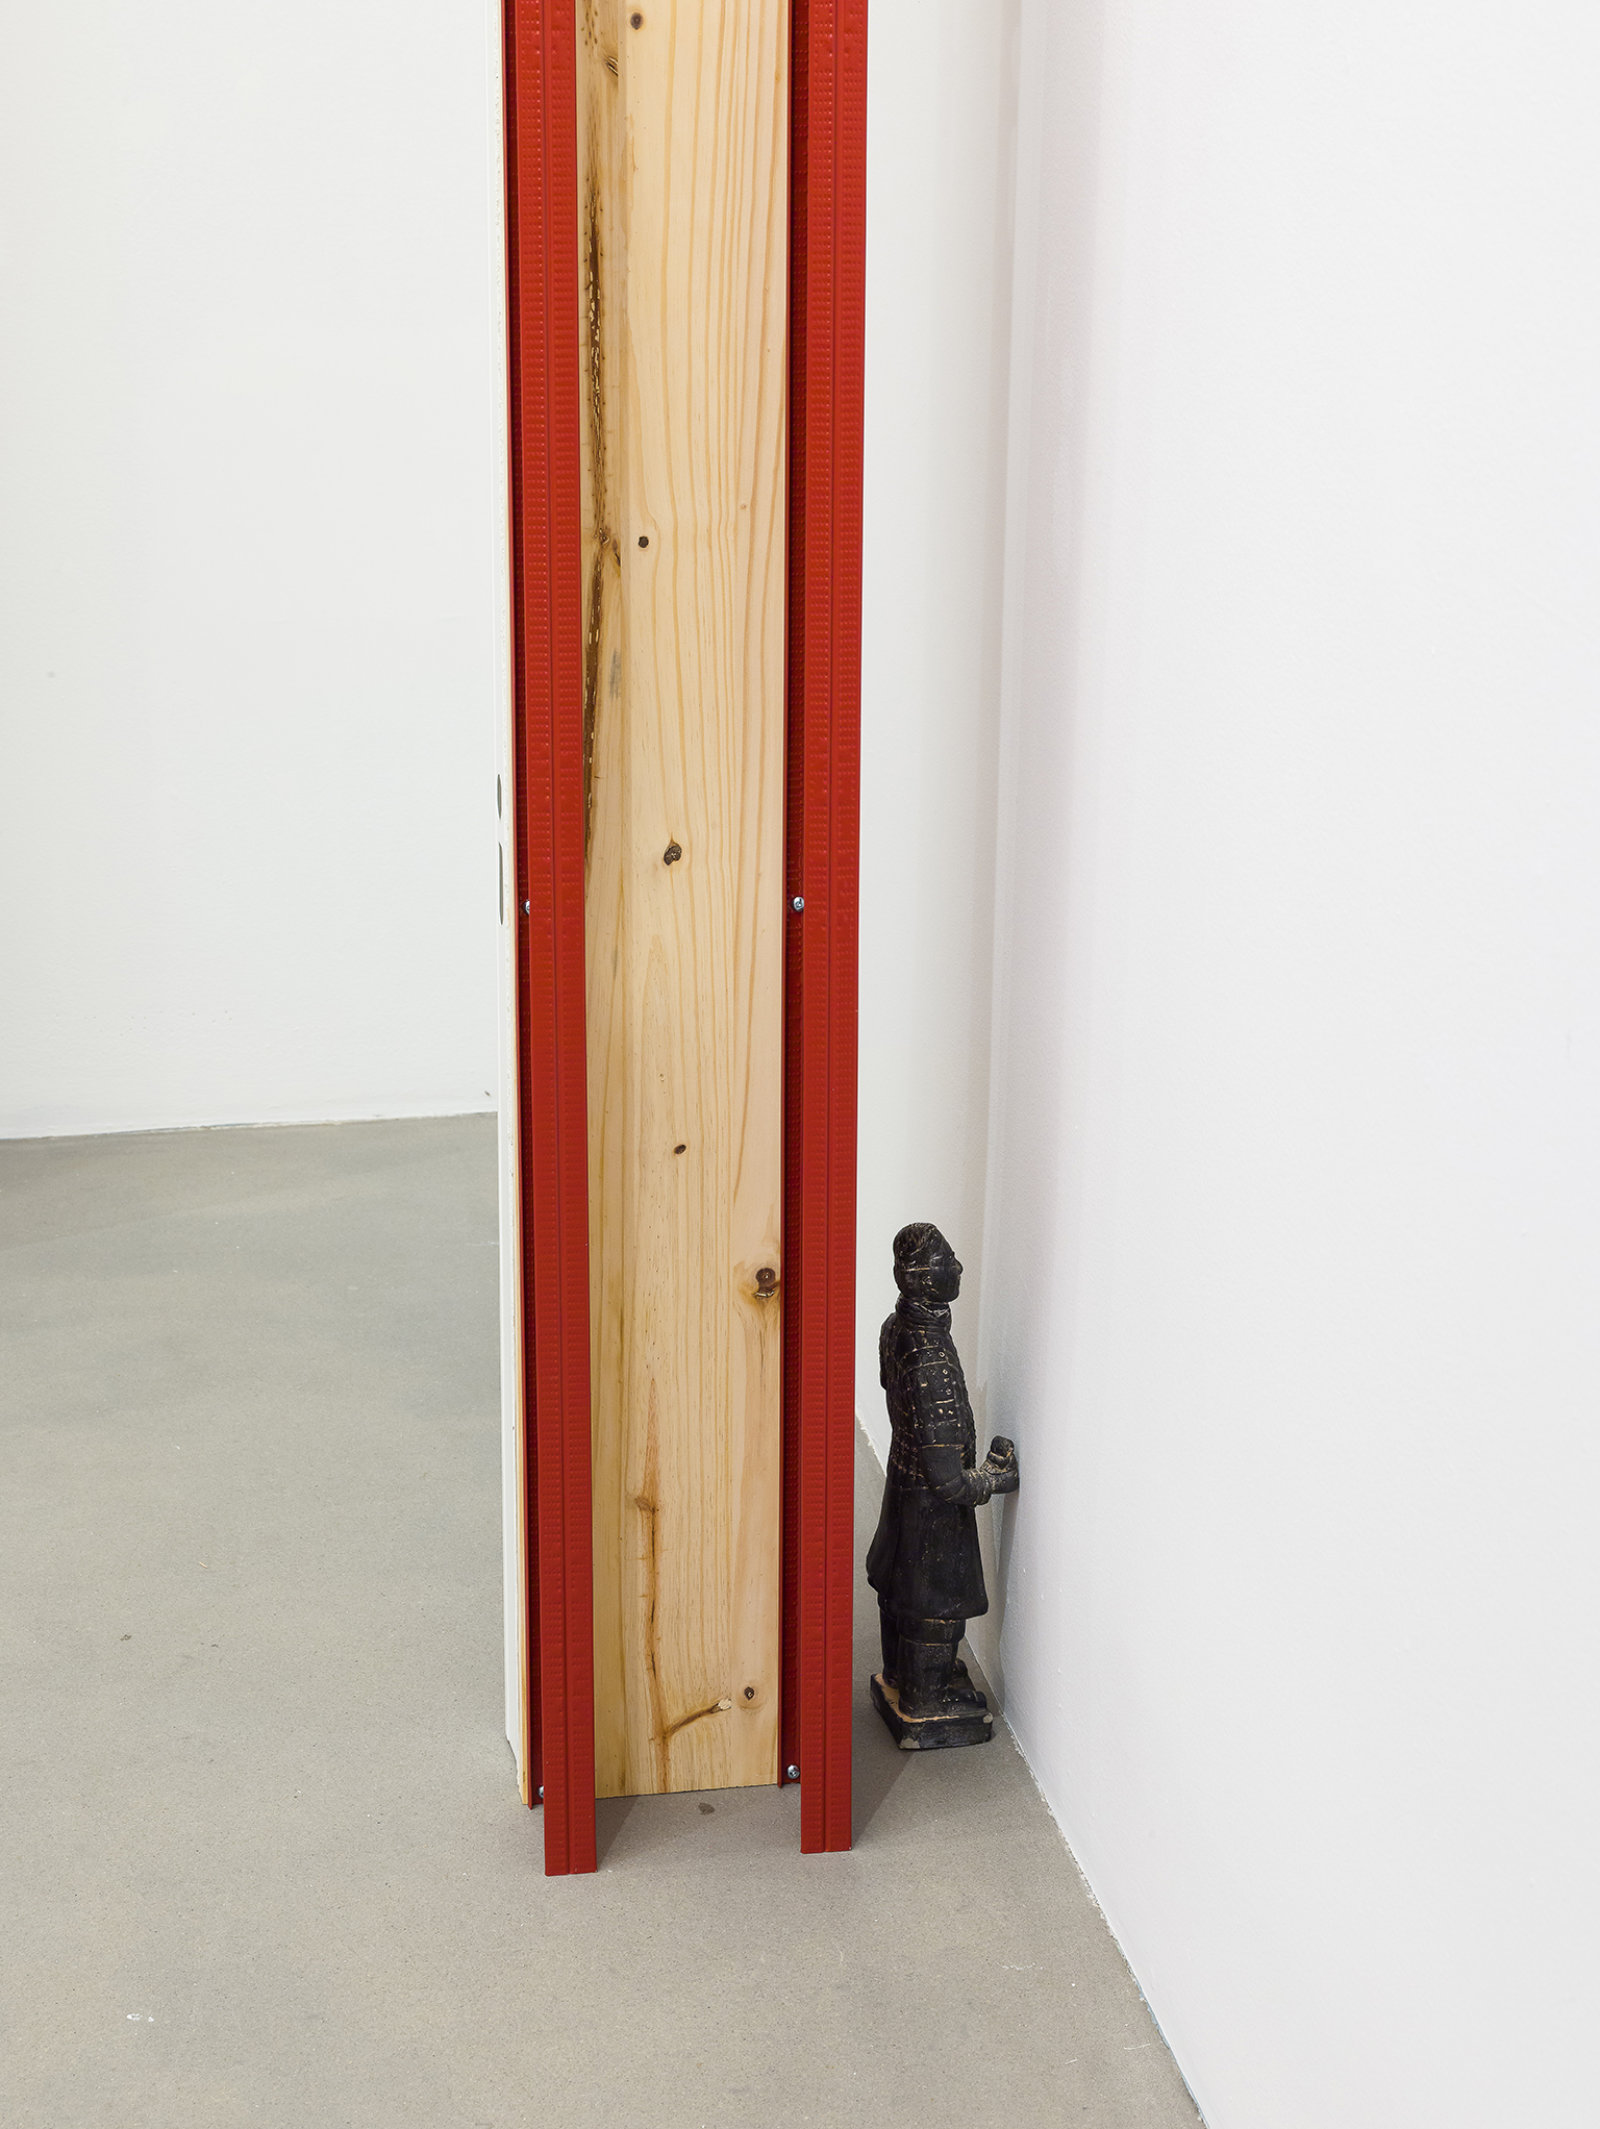 Duane Linklater, Untitled Problem 6 (detail), 2016, powder coated steel, drywall, plywood, screws, found statue, 96 x 8 in. (244 x 19 cm)